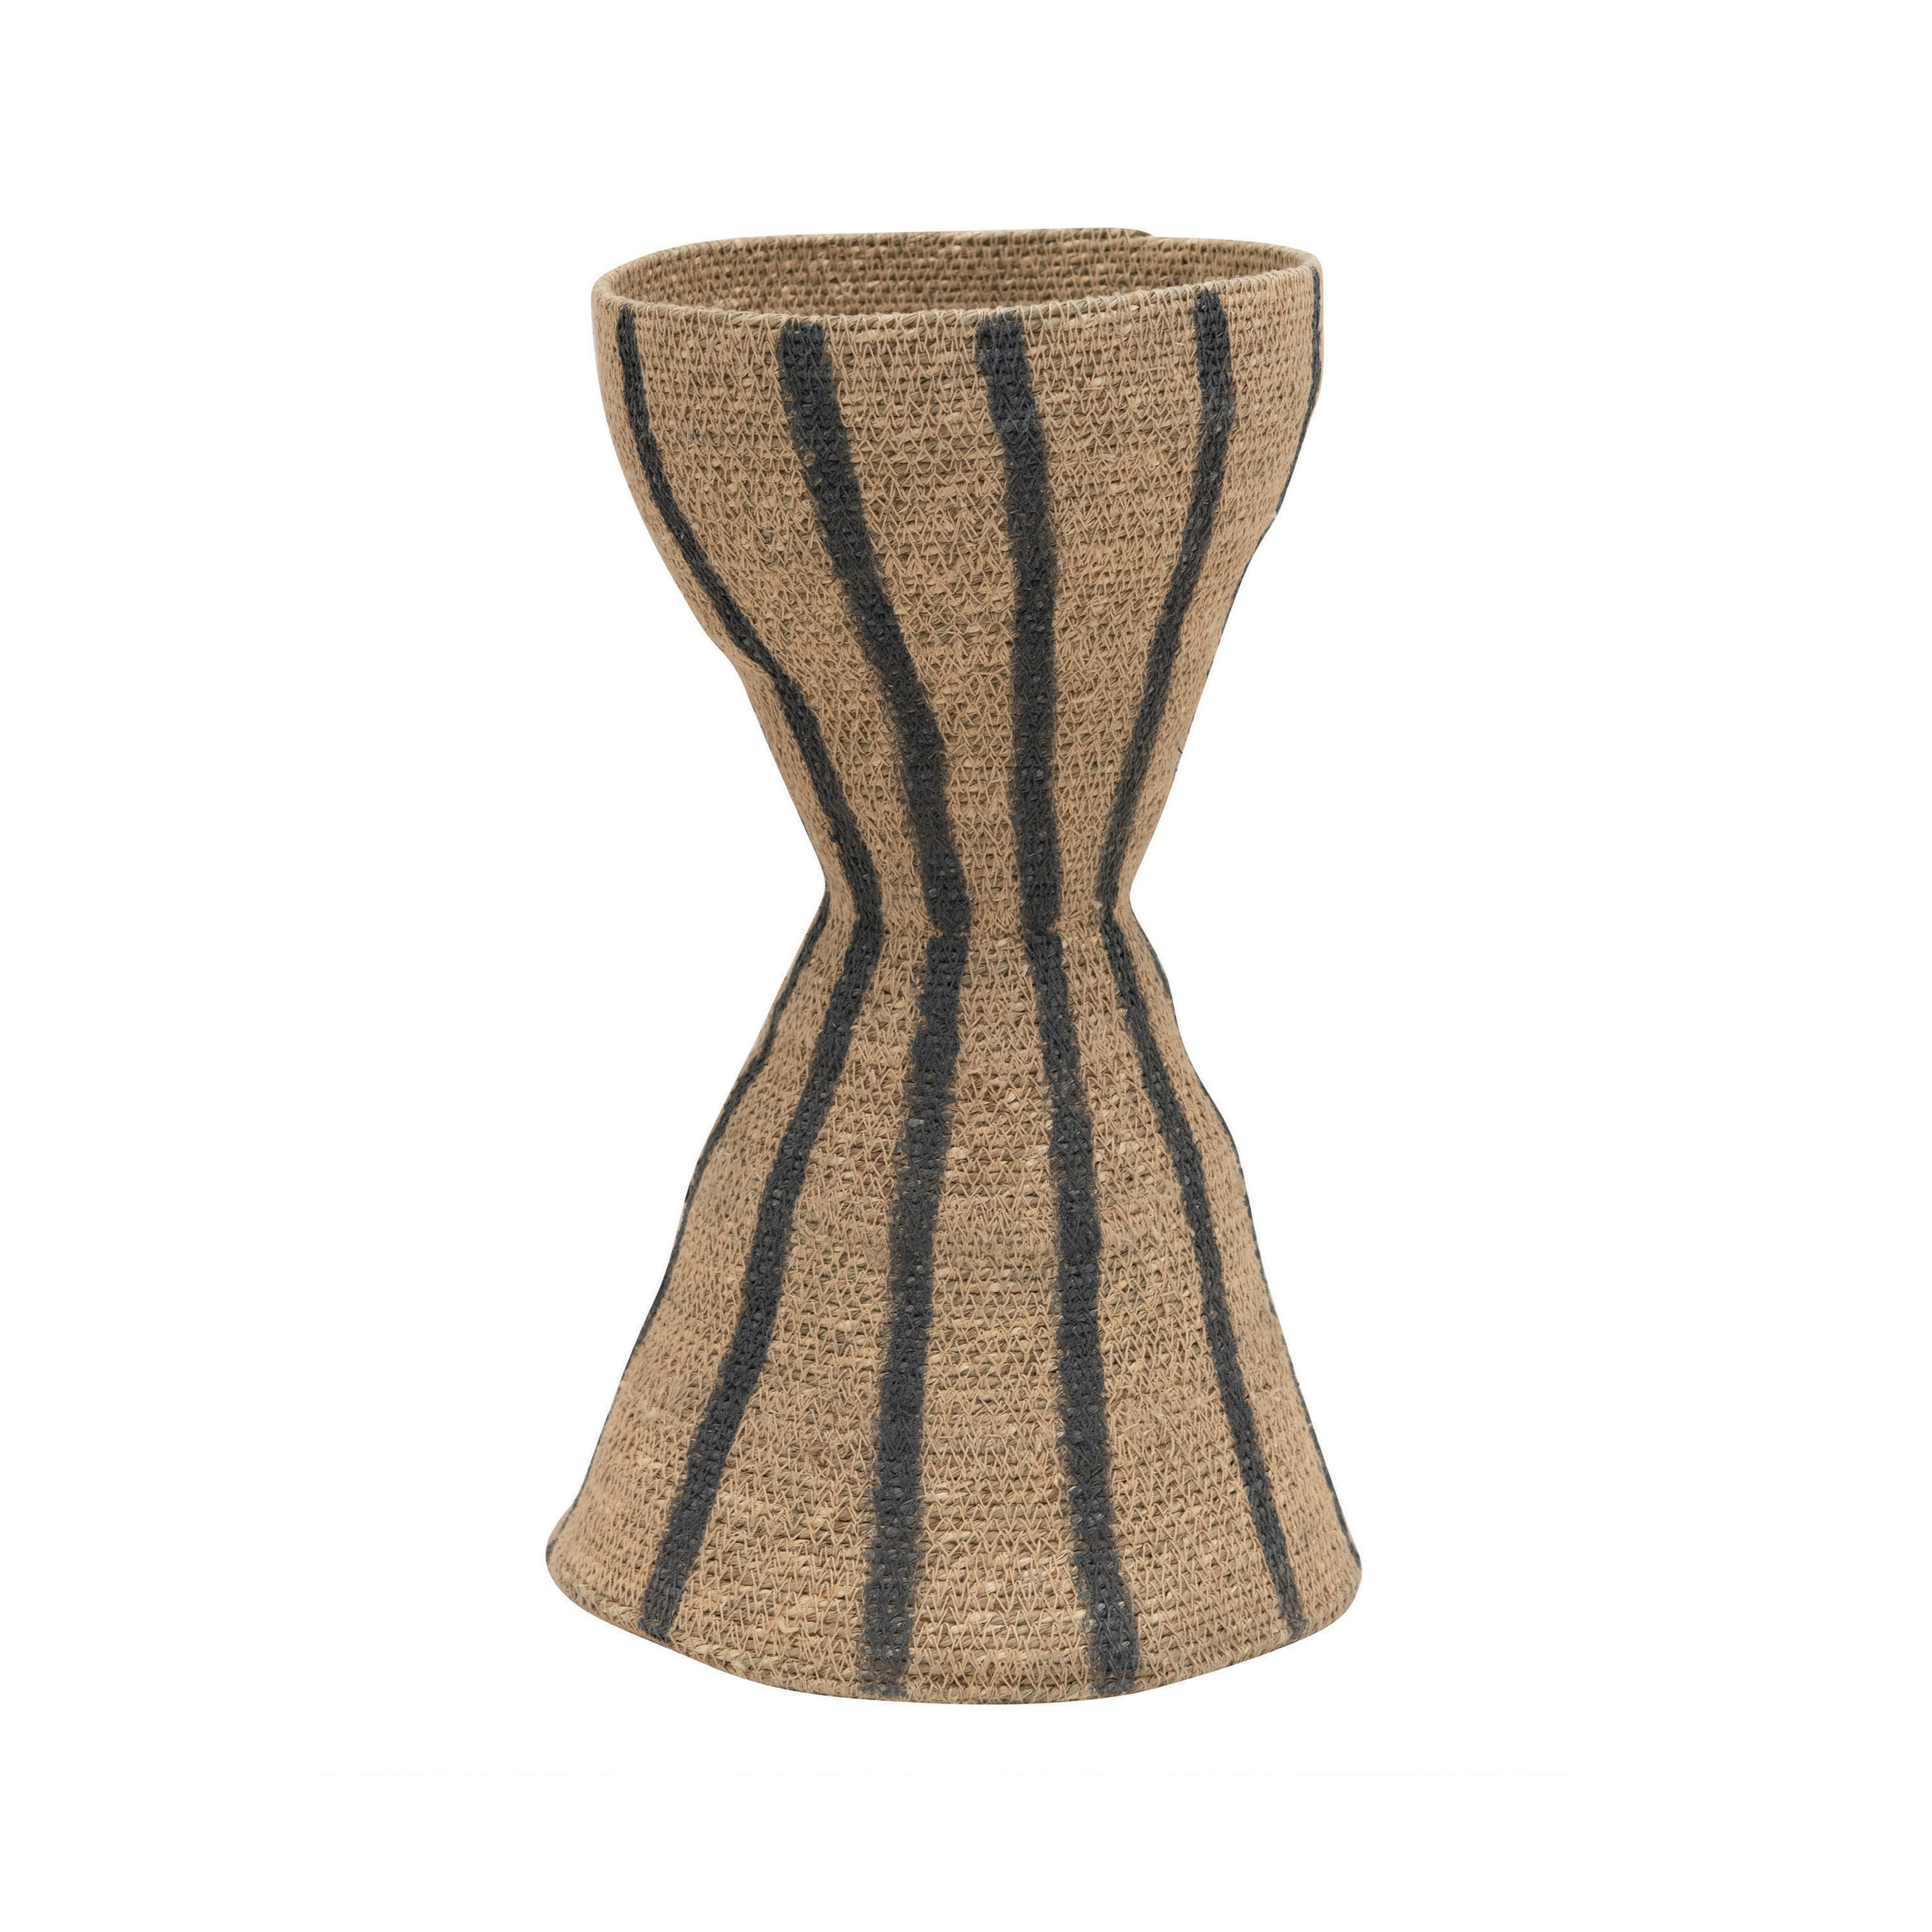 Hand-Woven Seagrass Hour Glass Shape Vase with Stripes, Natural & Black - Moss & Wilder